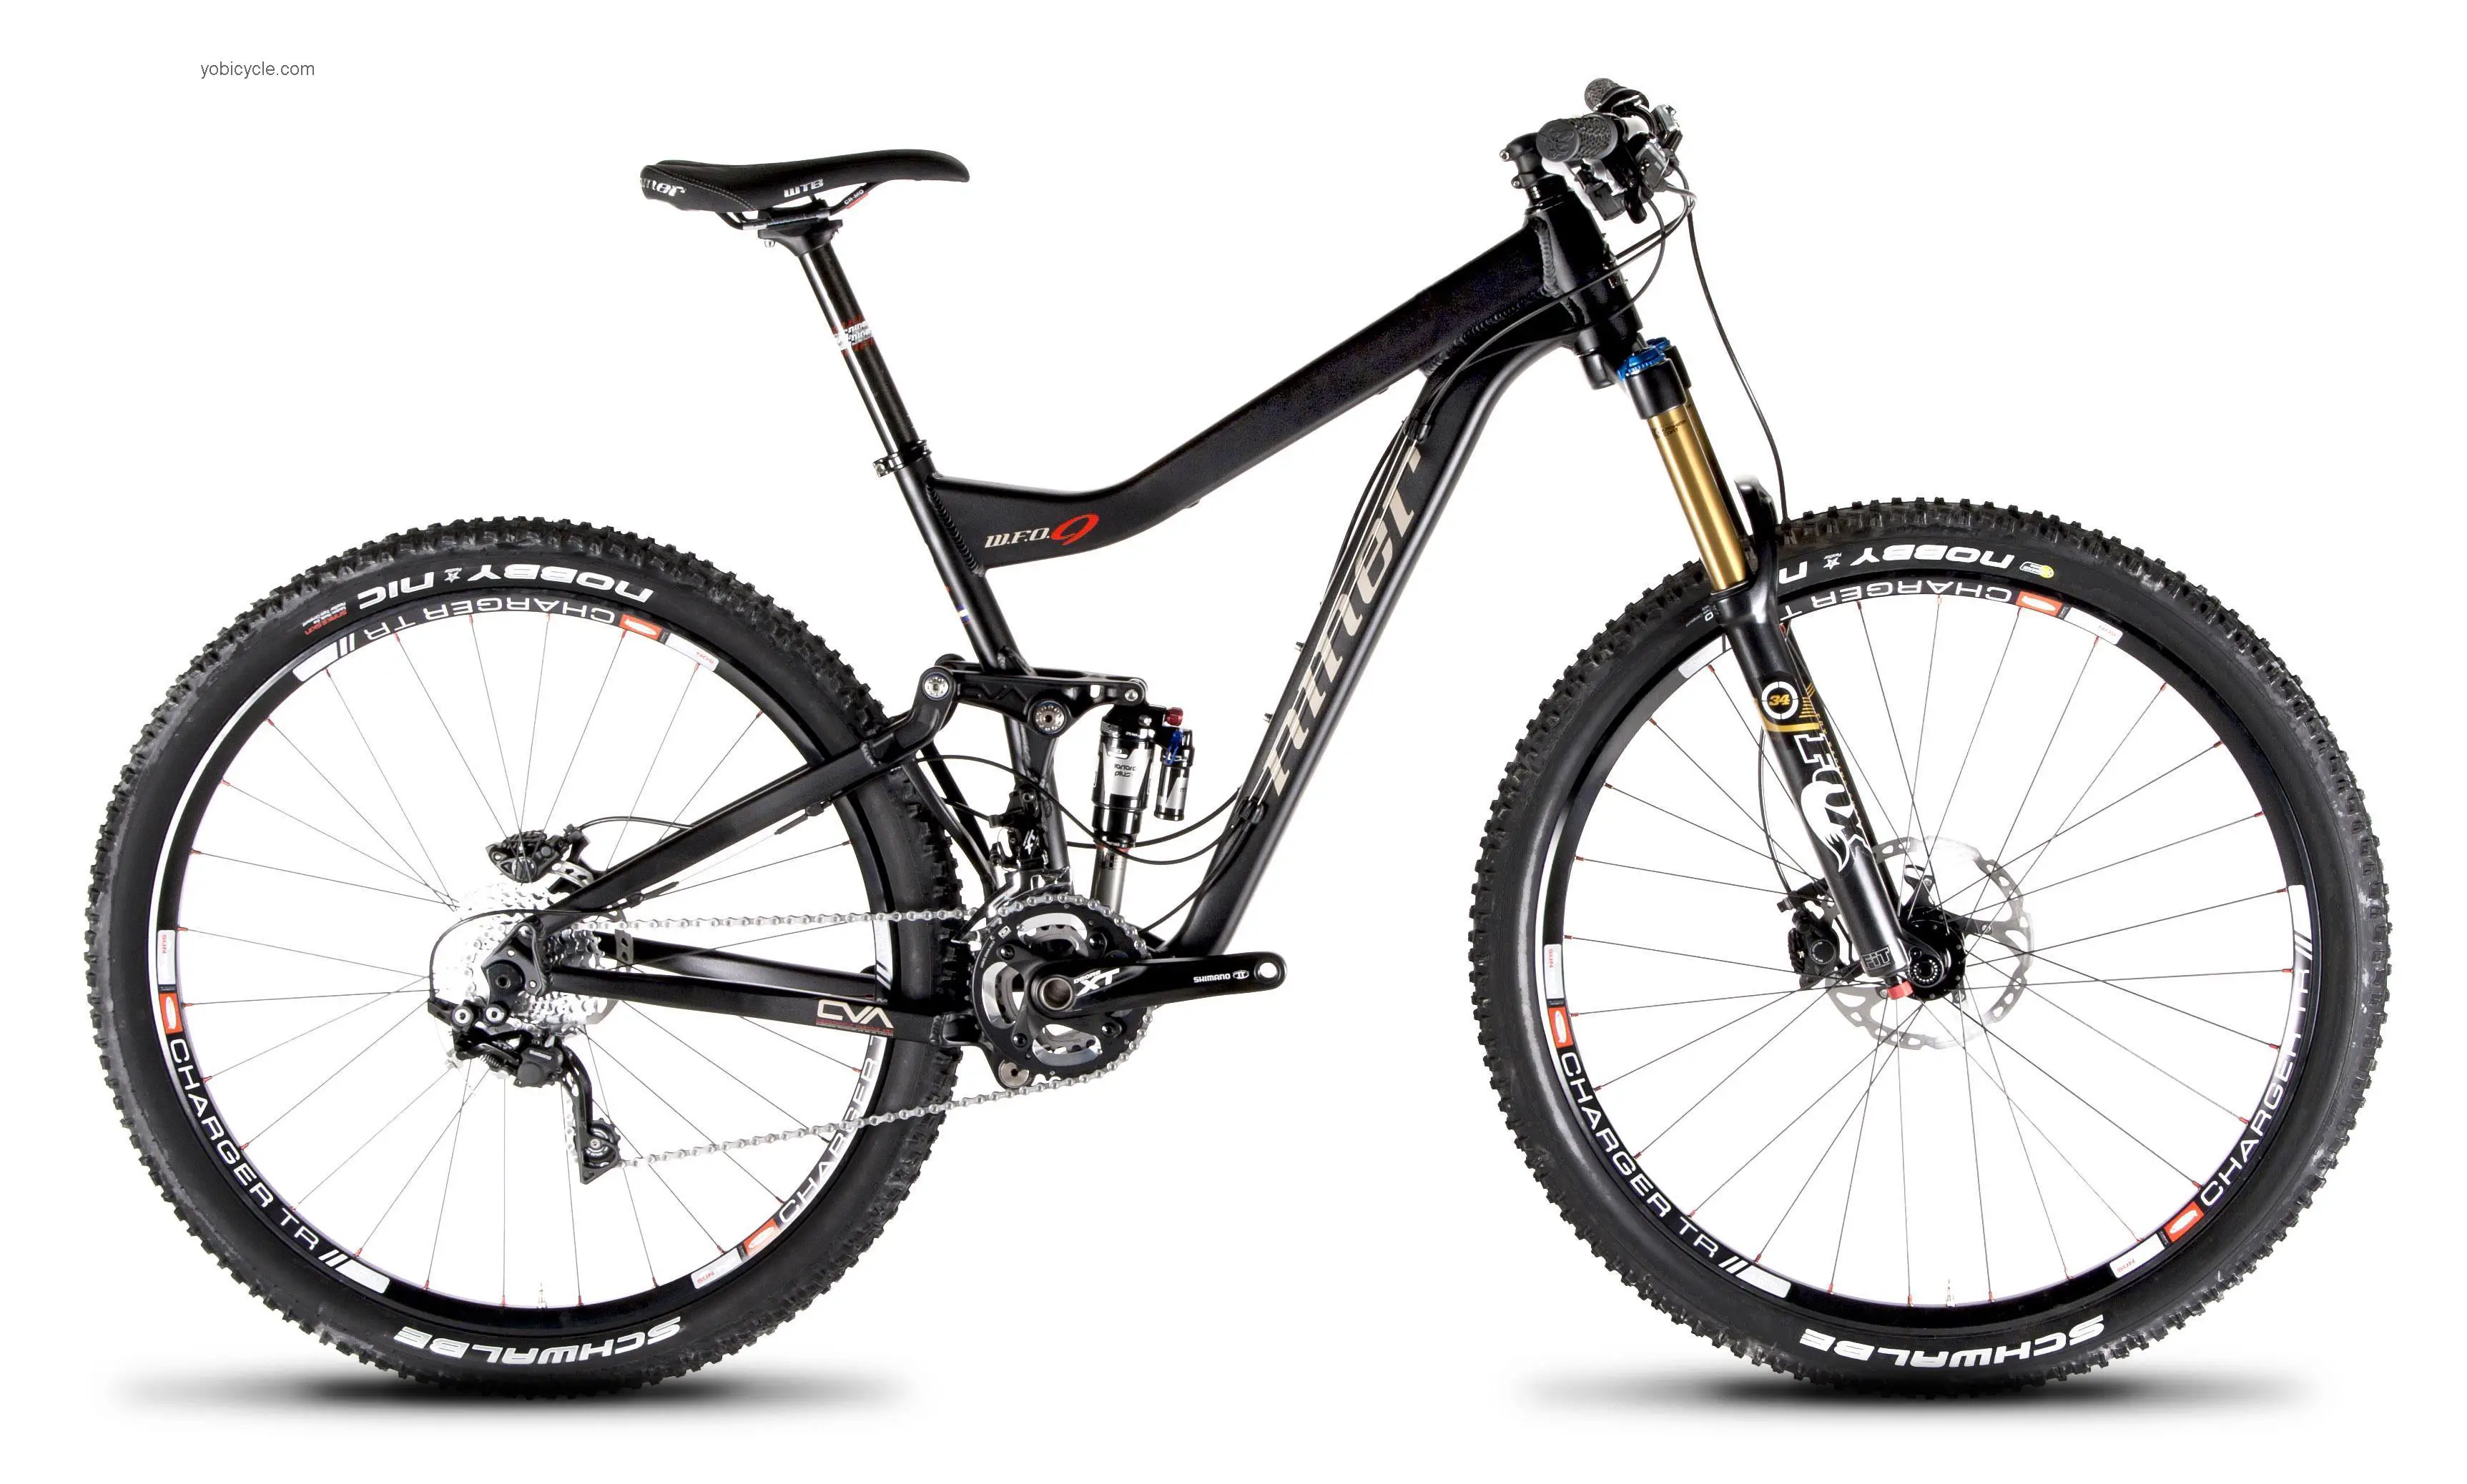 Niner W.F.O 9 XT 2013 comparison online with competitors